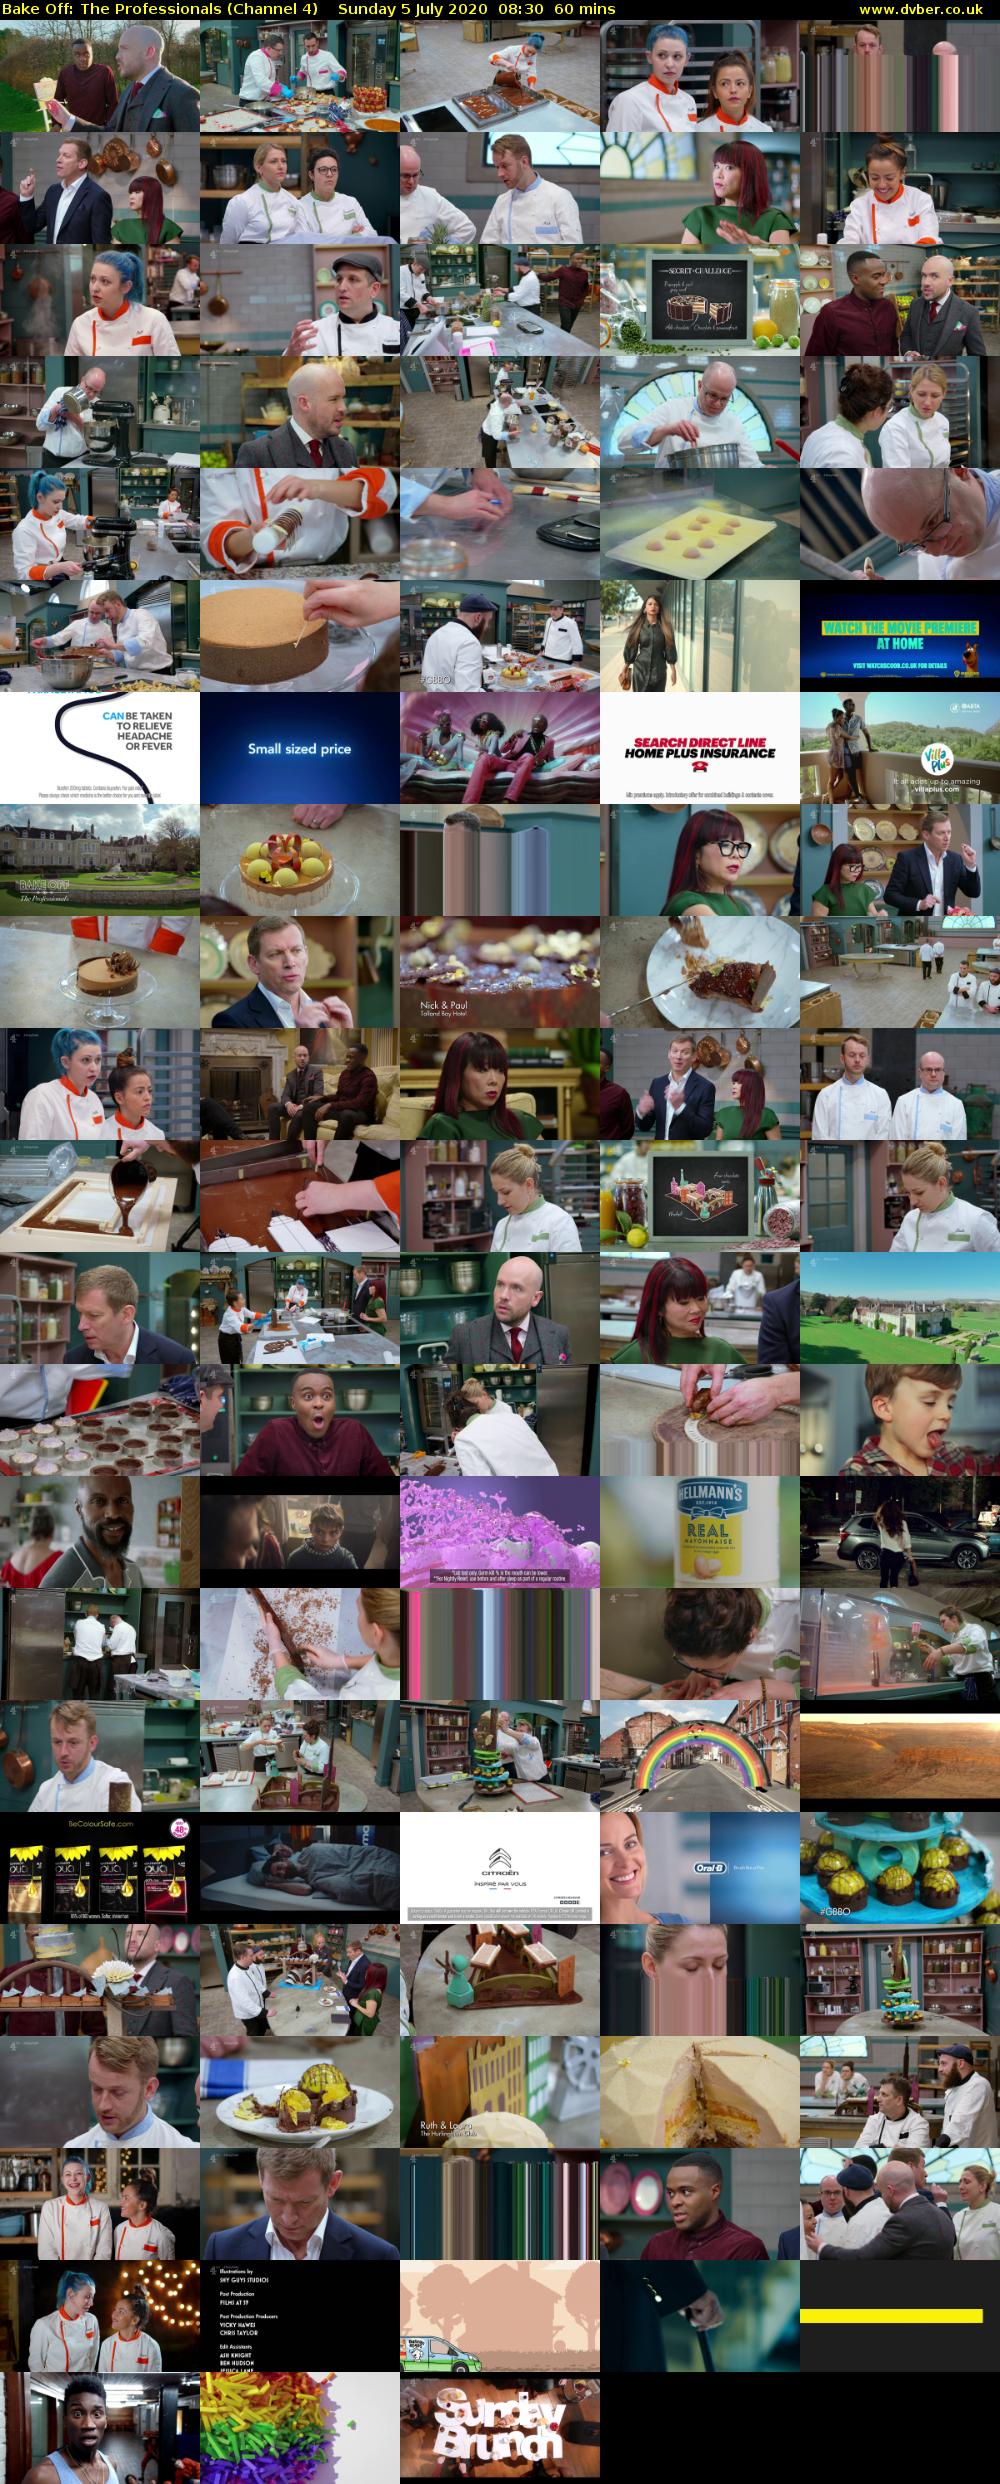 Bake Off: The Professionals (Channel 4) Sunday 5 July 2020 08:30 - 09:30